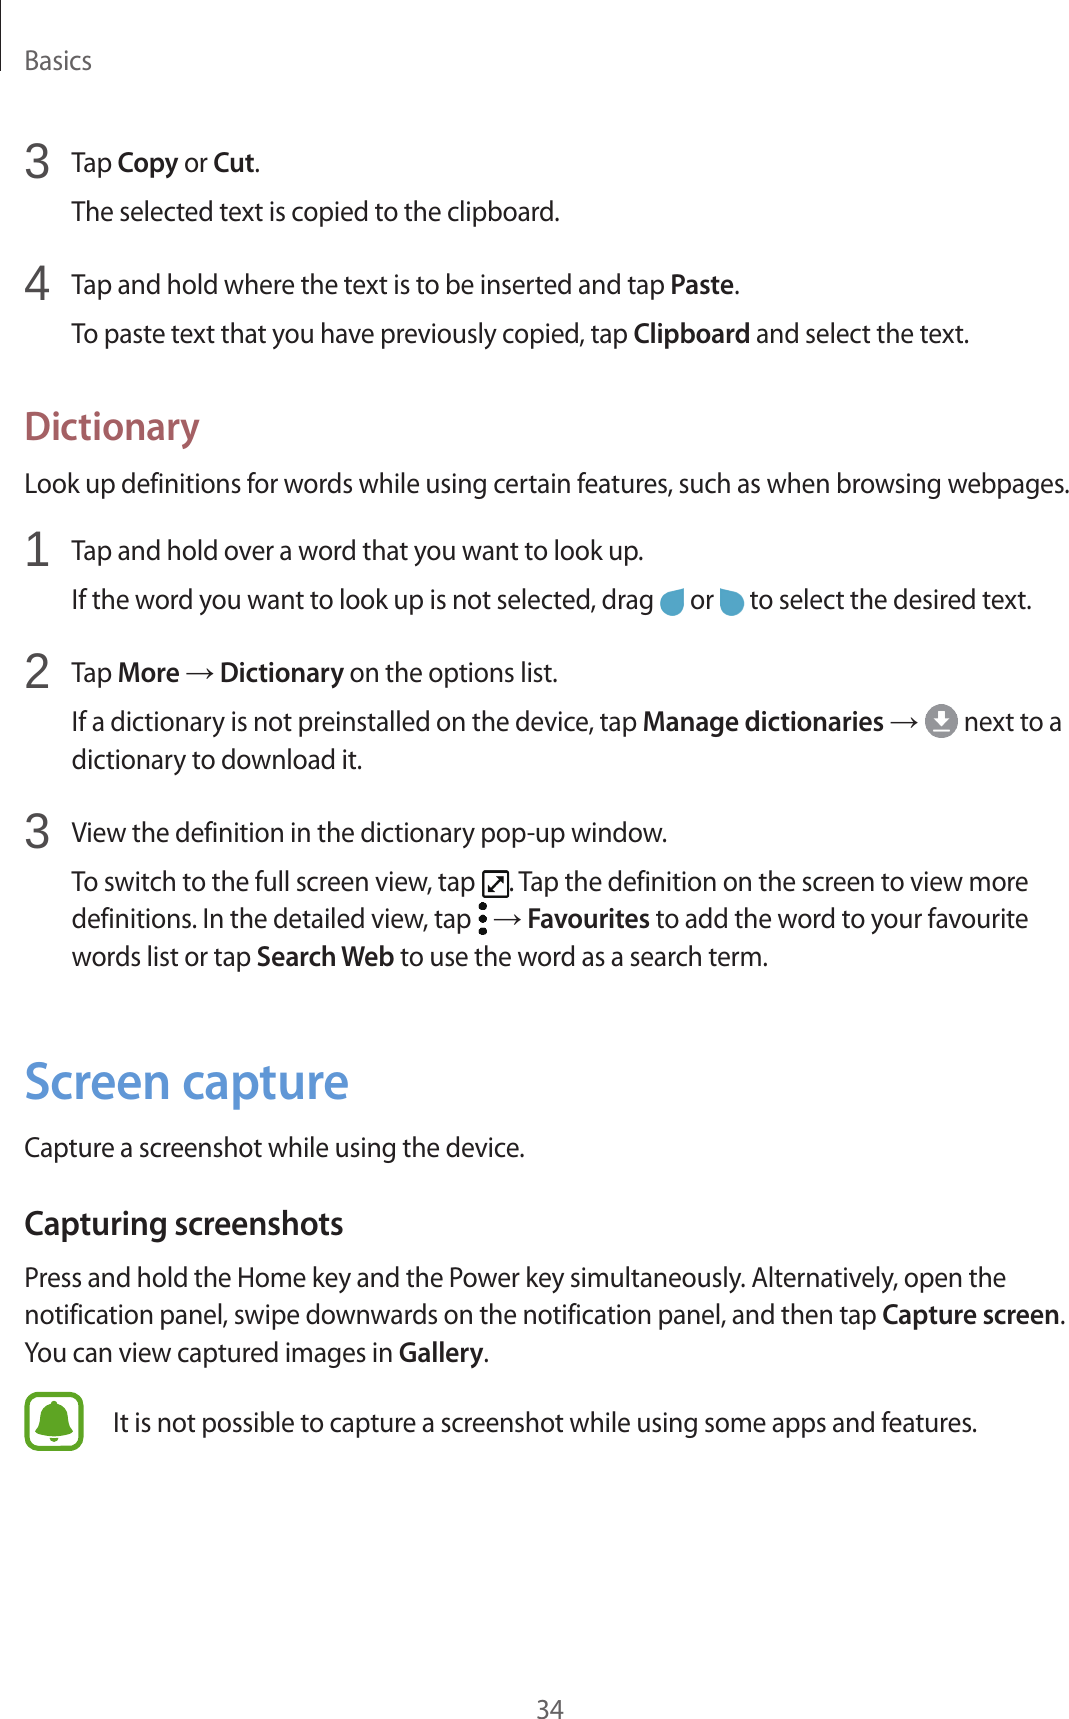 Basics343  Tap Copy or Cut.The selected text is copied to the clipboard.4  Tap and hold where the text is to be inserted and tap Paste.To paste text that you have previously copied, tap Clipboard and select the text.DictionaryLook up definitions for words while using certain features, such as when browsing webpages.1  Tap and hold over a word that you want to look up.If the word you want to look up is not selected, drag   or   to select the desired text.2  Tap More → Dictionary on the options list.If a dictionary is not preinstalled on the device, tap Manage dictionaries →  next to a dictionary to download it.3  View the definition in the dictionary pop-up window.To switch to the full screen view, tap  . Tap the definition on the screen to view more definitions. In the detailed view, tap   → Favourites to add the word to your favourite words list or tap Search Web to use the word as a search term.Screen captureCapture a screenshot while using the device.Capturing screenshotsPress and hold the Home key and the Power key simultaneously. Alternatively, open the notification panel, swipe downwards on the notification panel, and then tap Capture screen. You can view captured images in Gallery.It is not possible to capture a screenshot while using some apps and features.